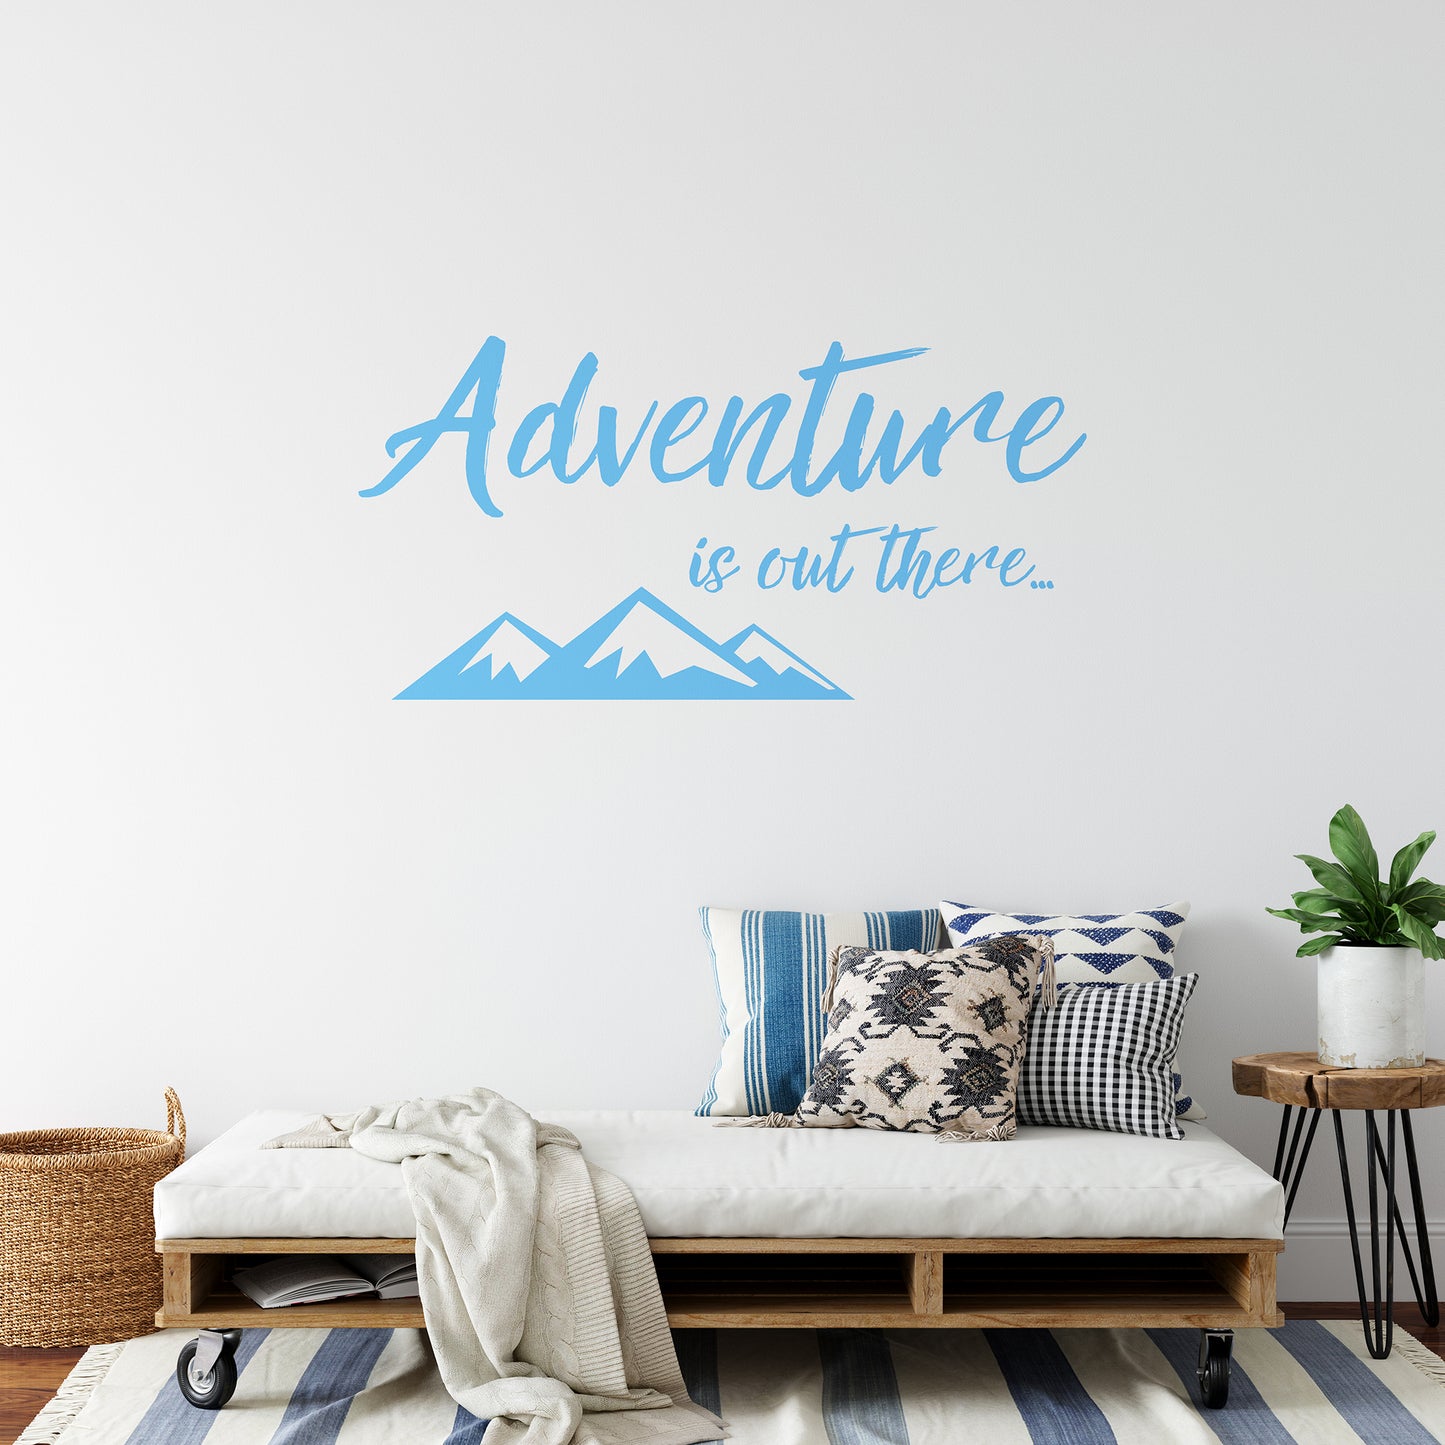 Adventure is out there... | Wall quote